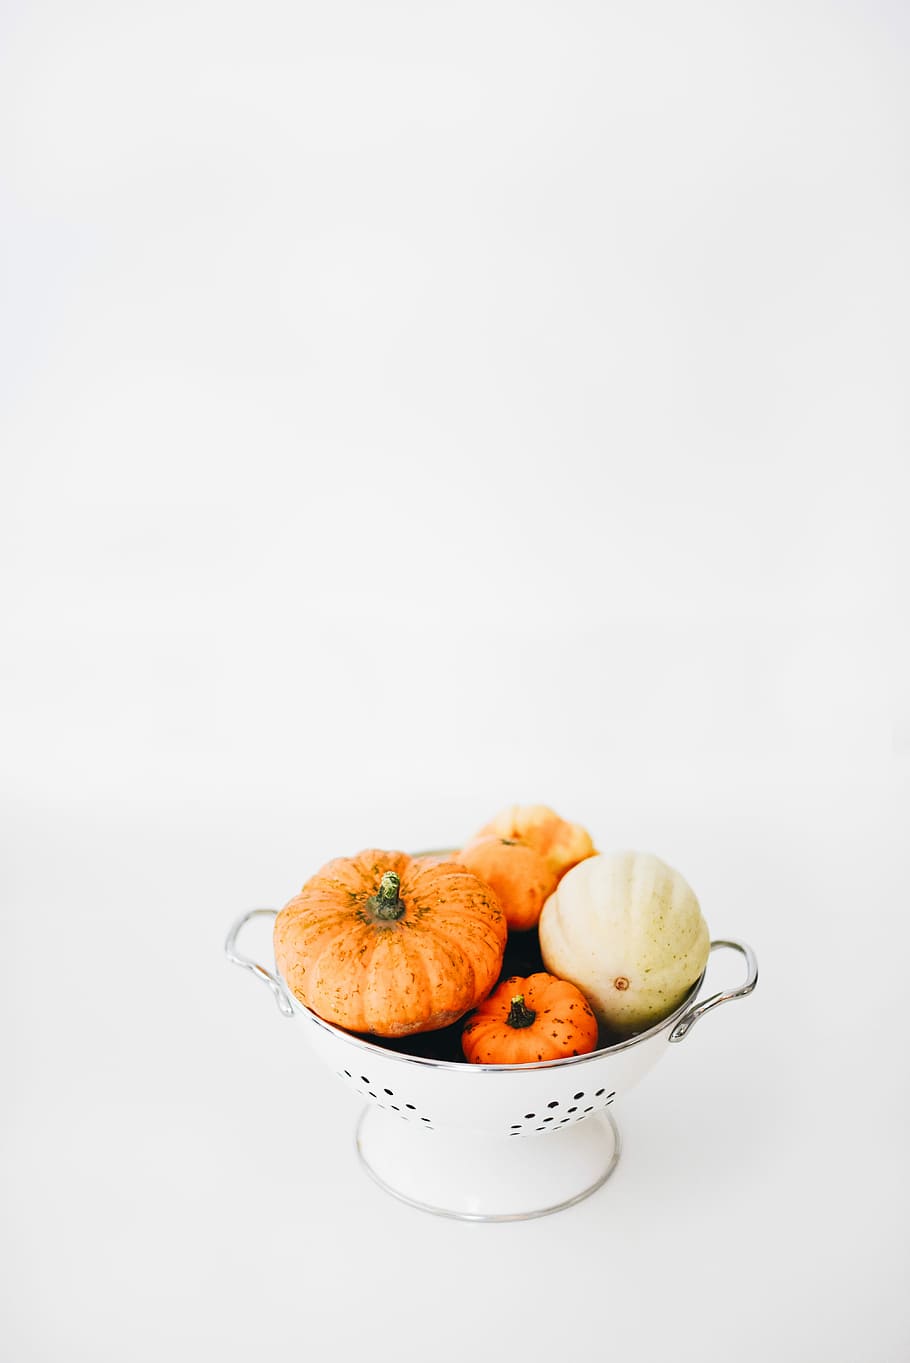 four round orange squashes on colander, assorted vegetables on stainless steel strainer, HD wallpaper